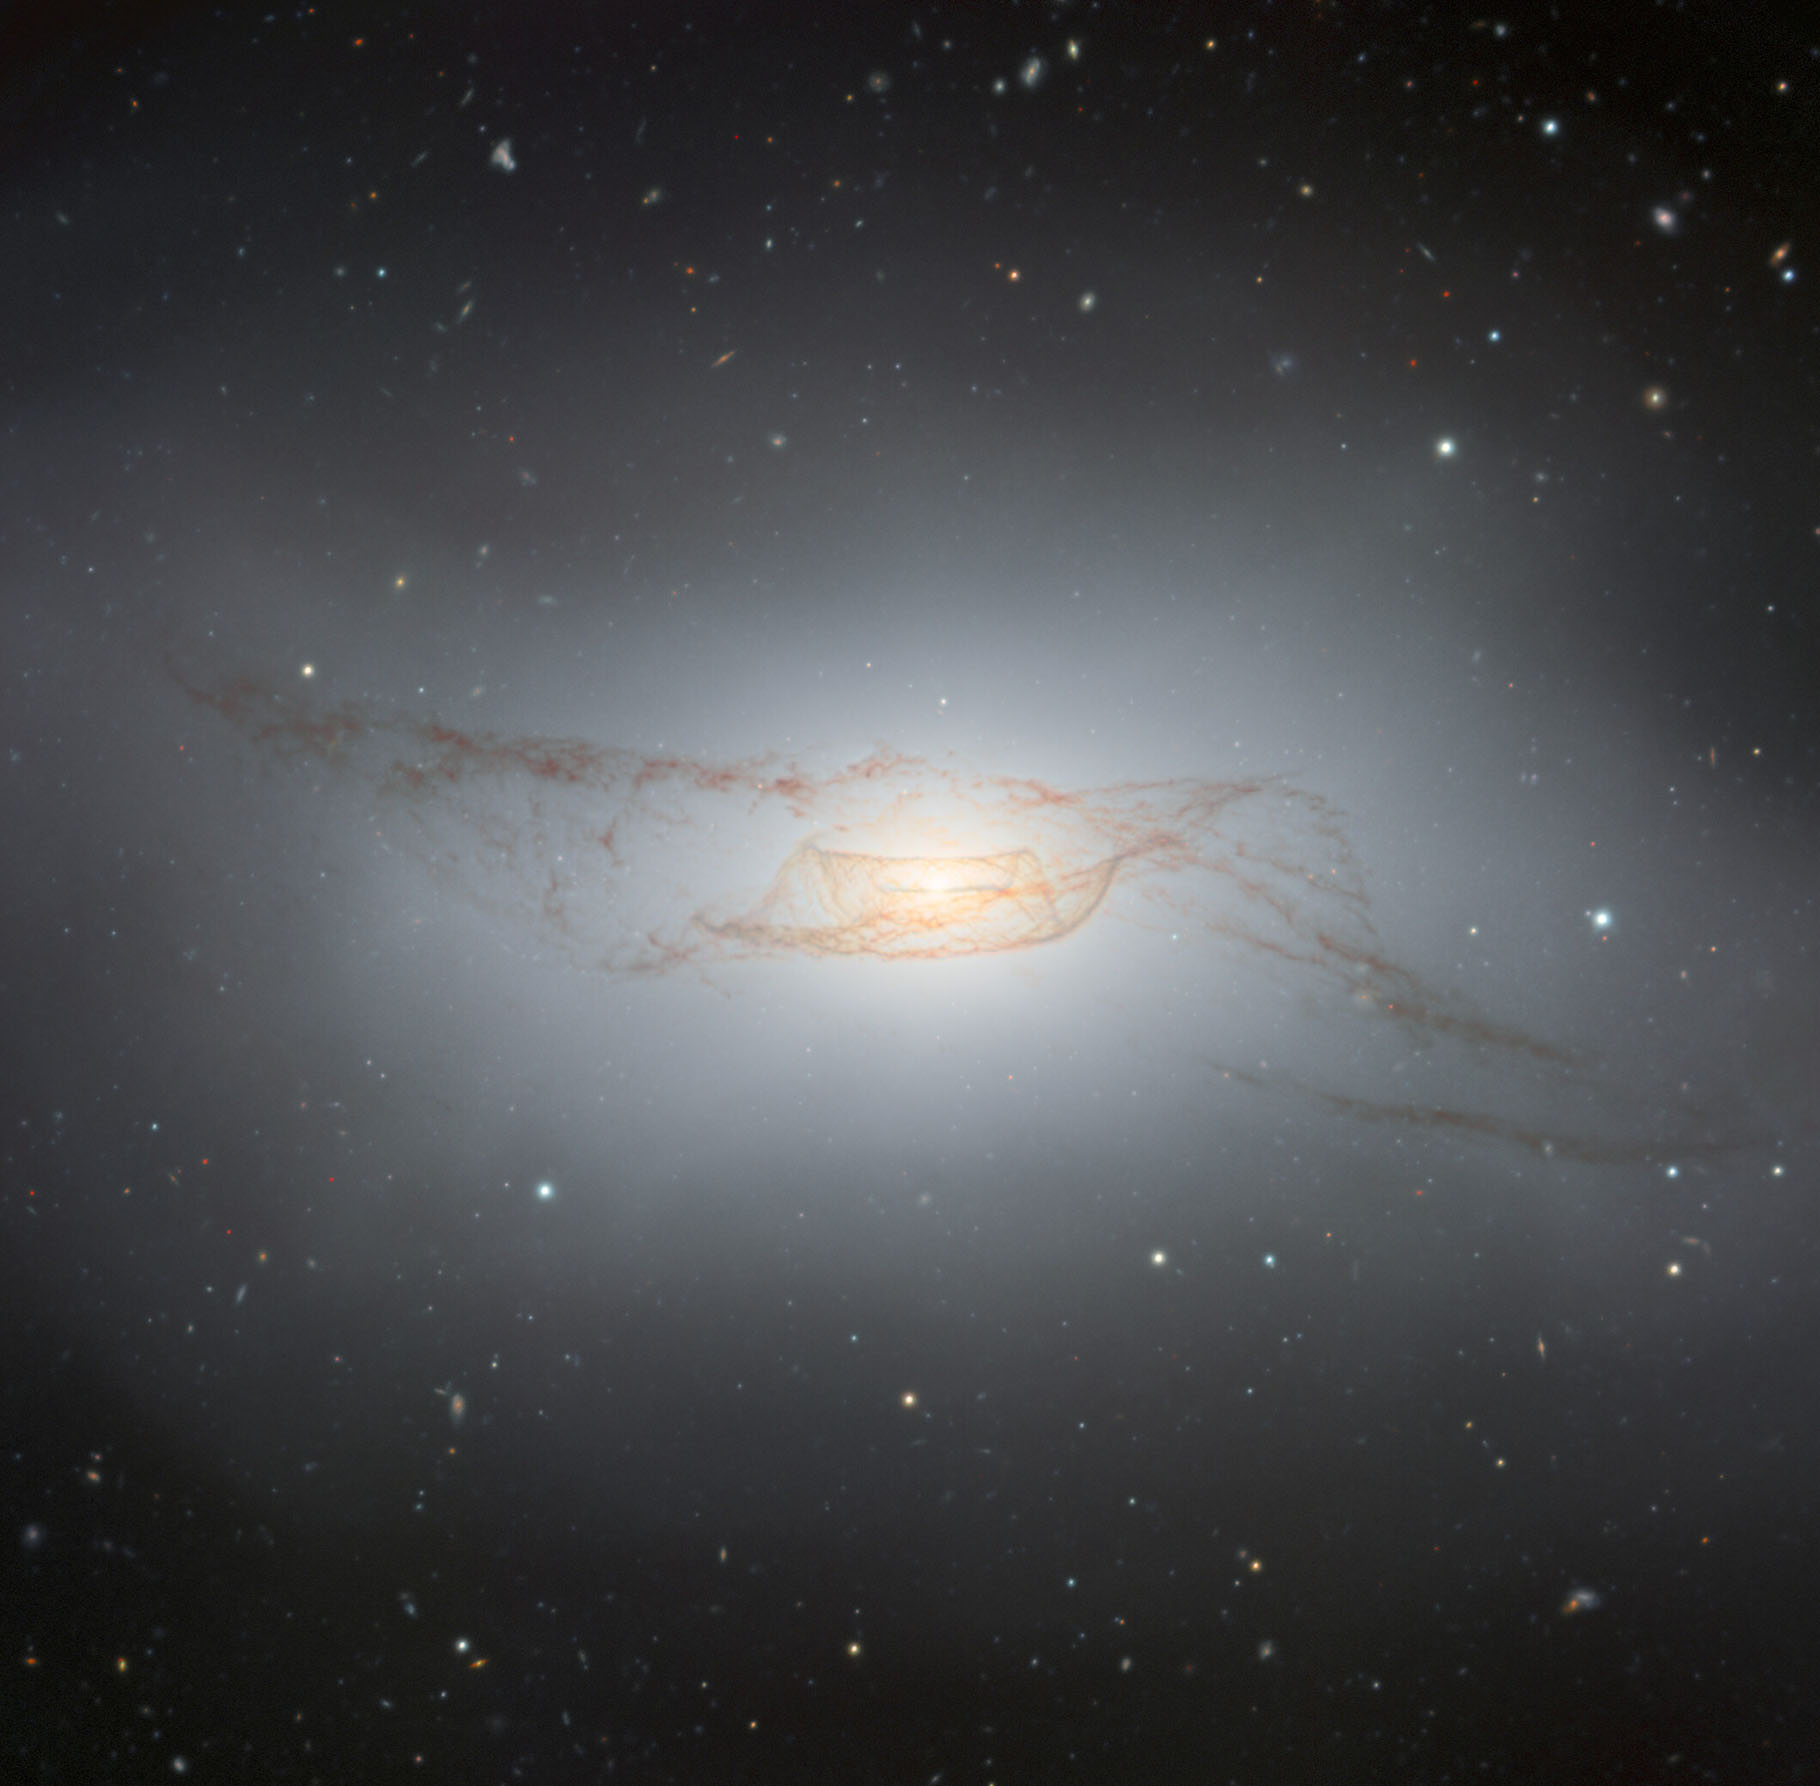 The lenticular galaxy NGC 4753, captured by the Gemini South telescope, one half of the International Gemini Observatory operated by NSF’s NOIRLab, is a truly remarkable object. Its prominent and complex network of dust lanes that twist around its galactic nucleus define its ‘peculiar’ classification and are the likely result of a galactic merger with a nearby dwarf galaxy about 1.3 billion years ago.